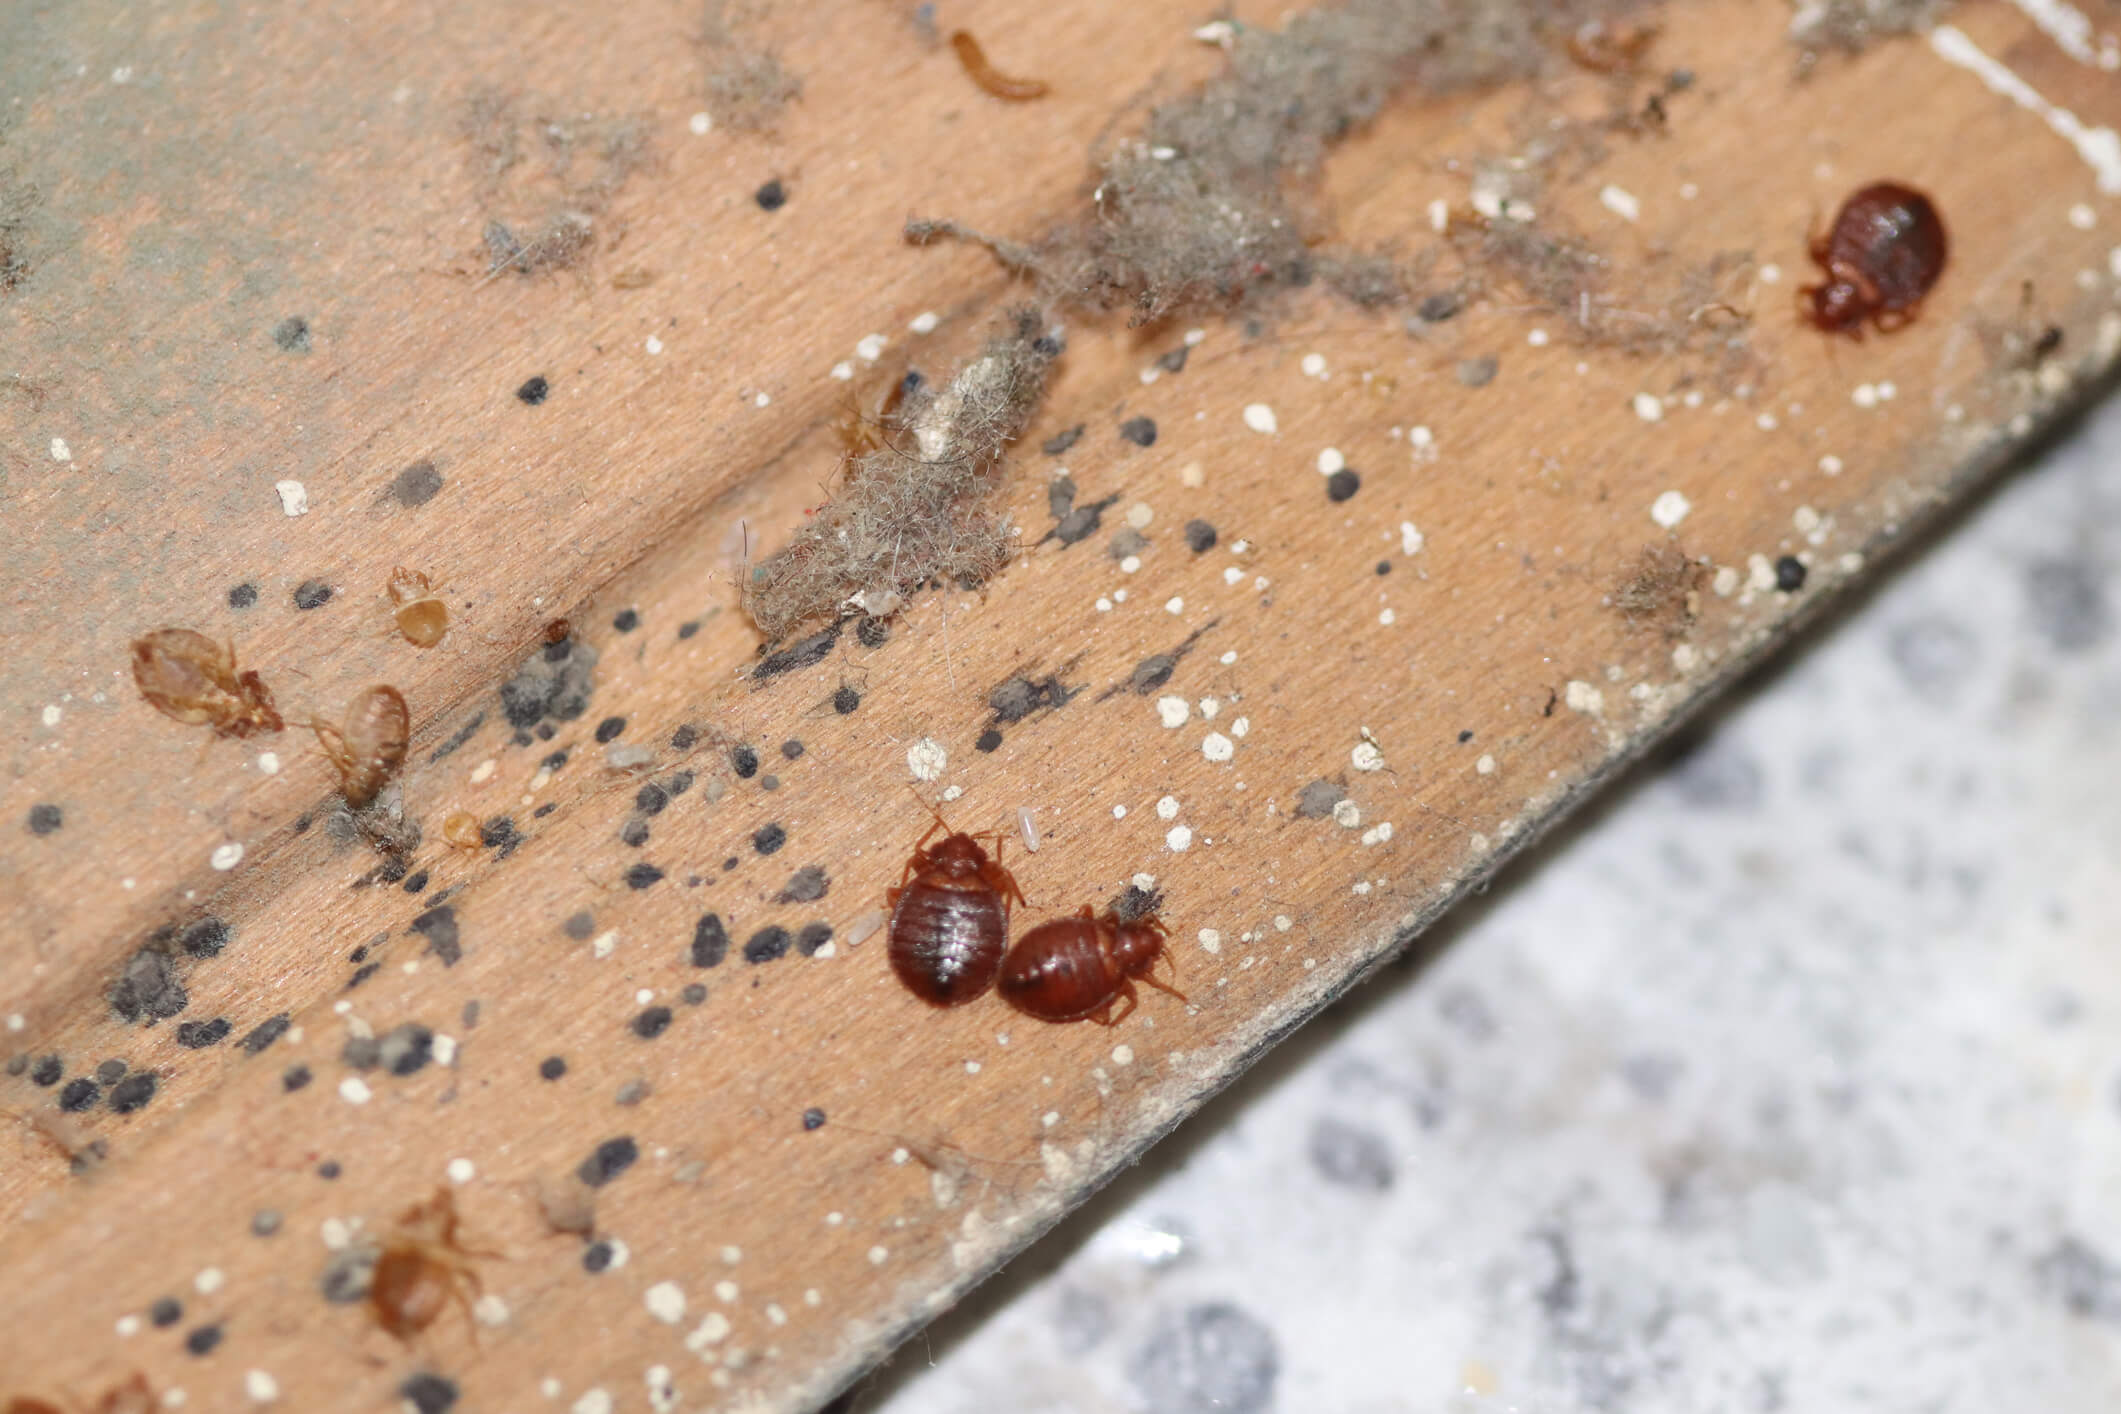 Can Bed Bugs Wake You Up?